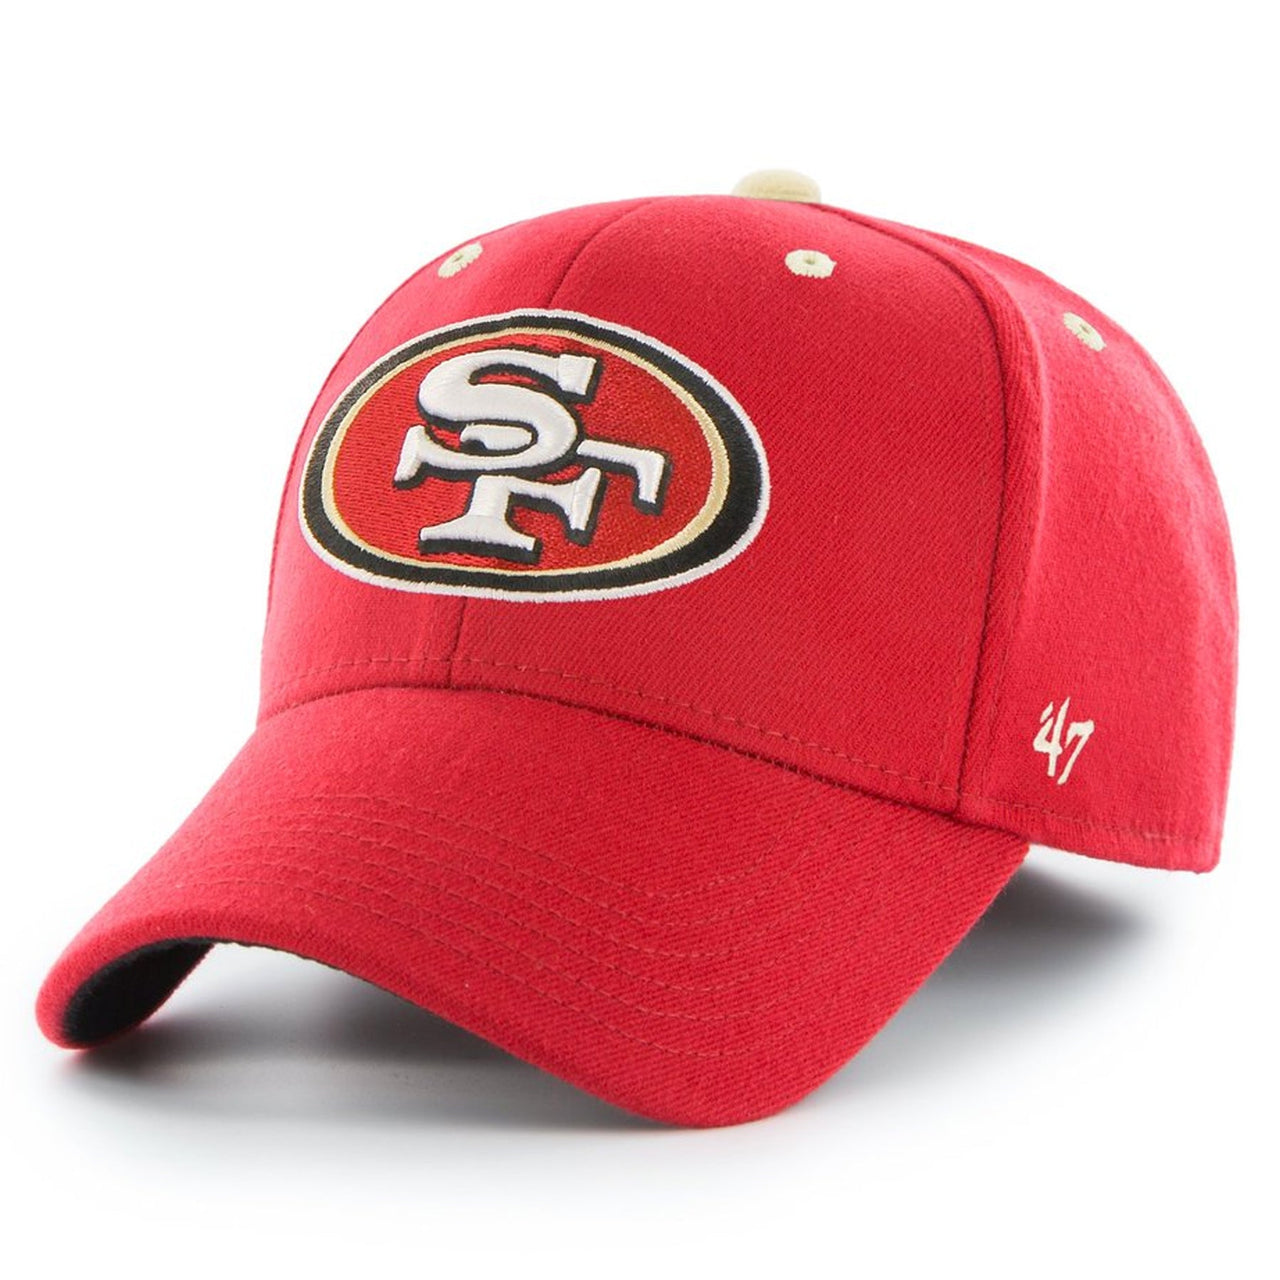 Embroidered on the front of the San Francisco 49ers stretch fit cap is the San Francisco 49ers logo in red, tan, white, and black